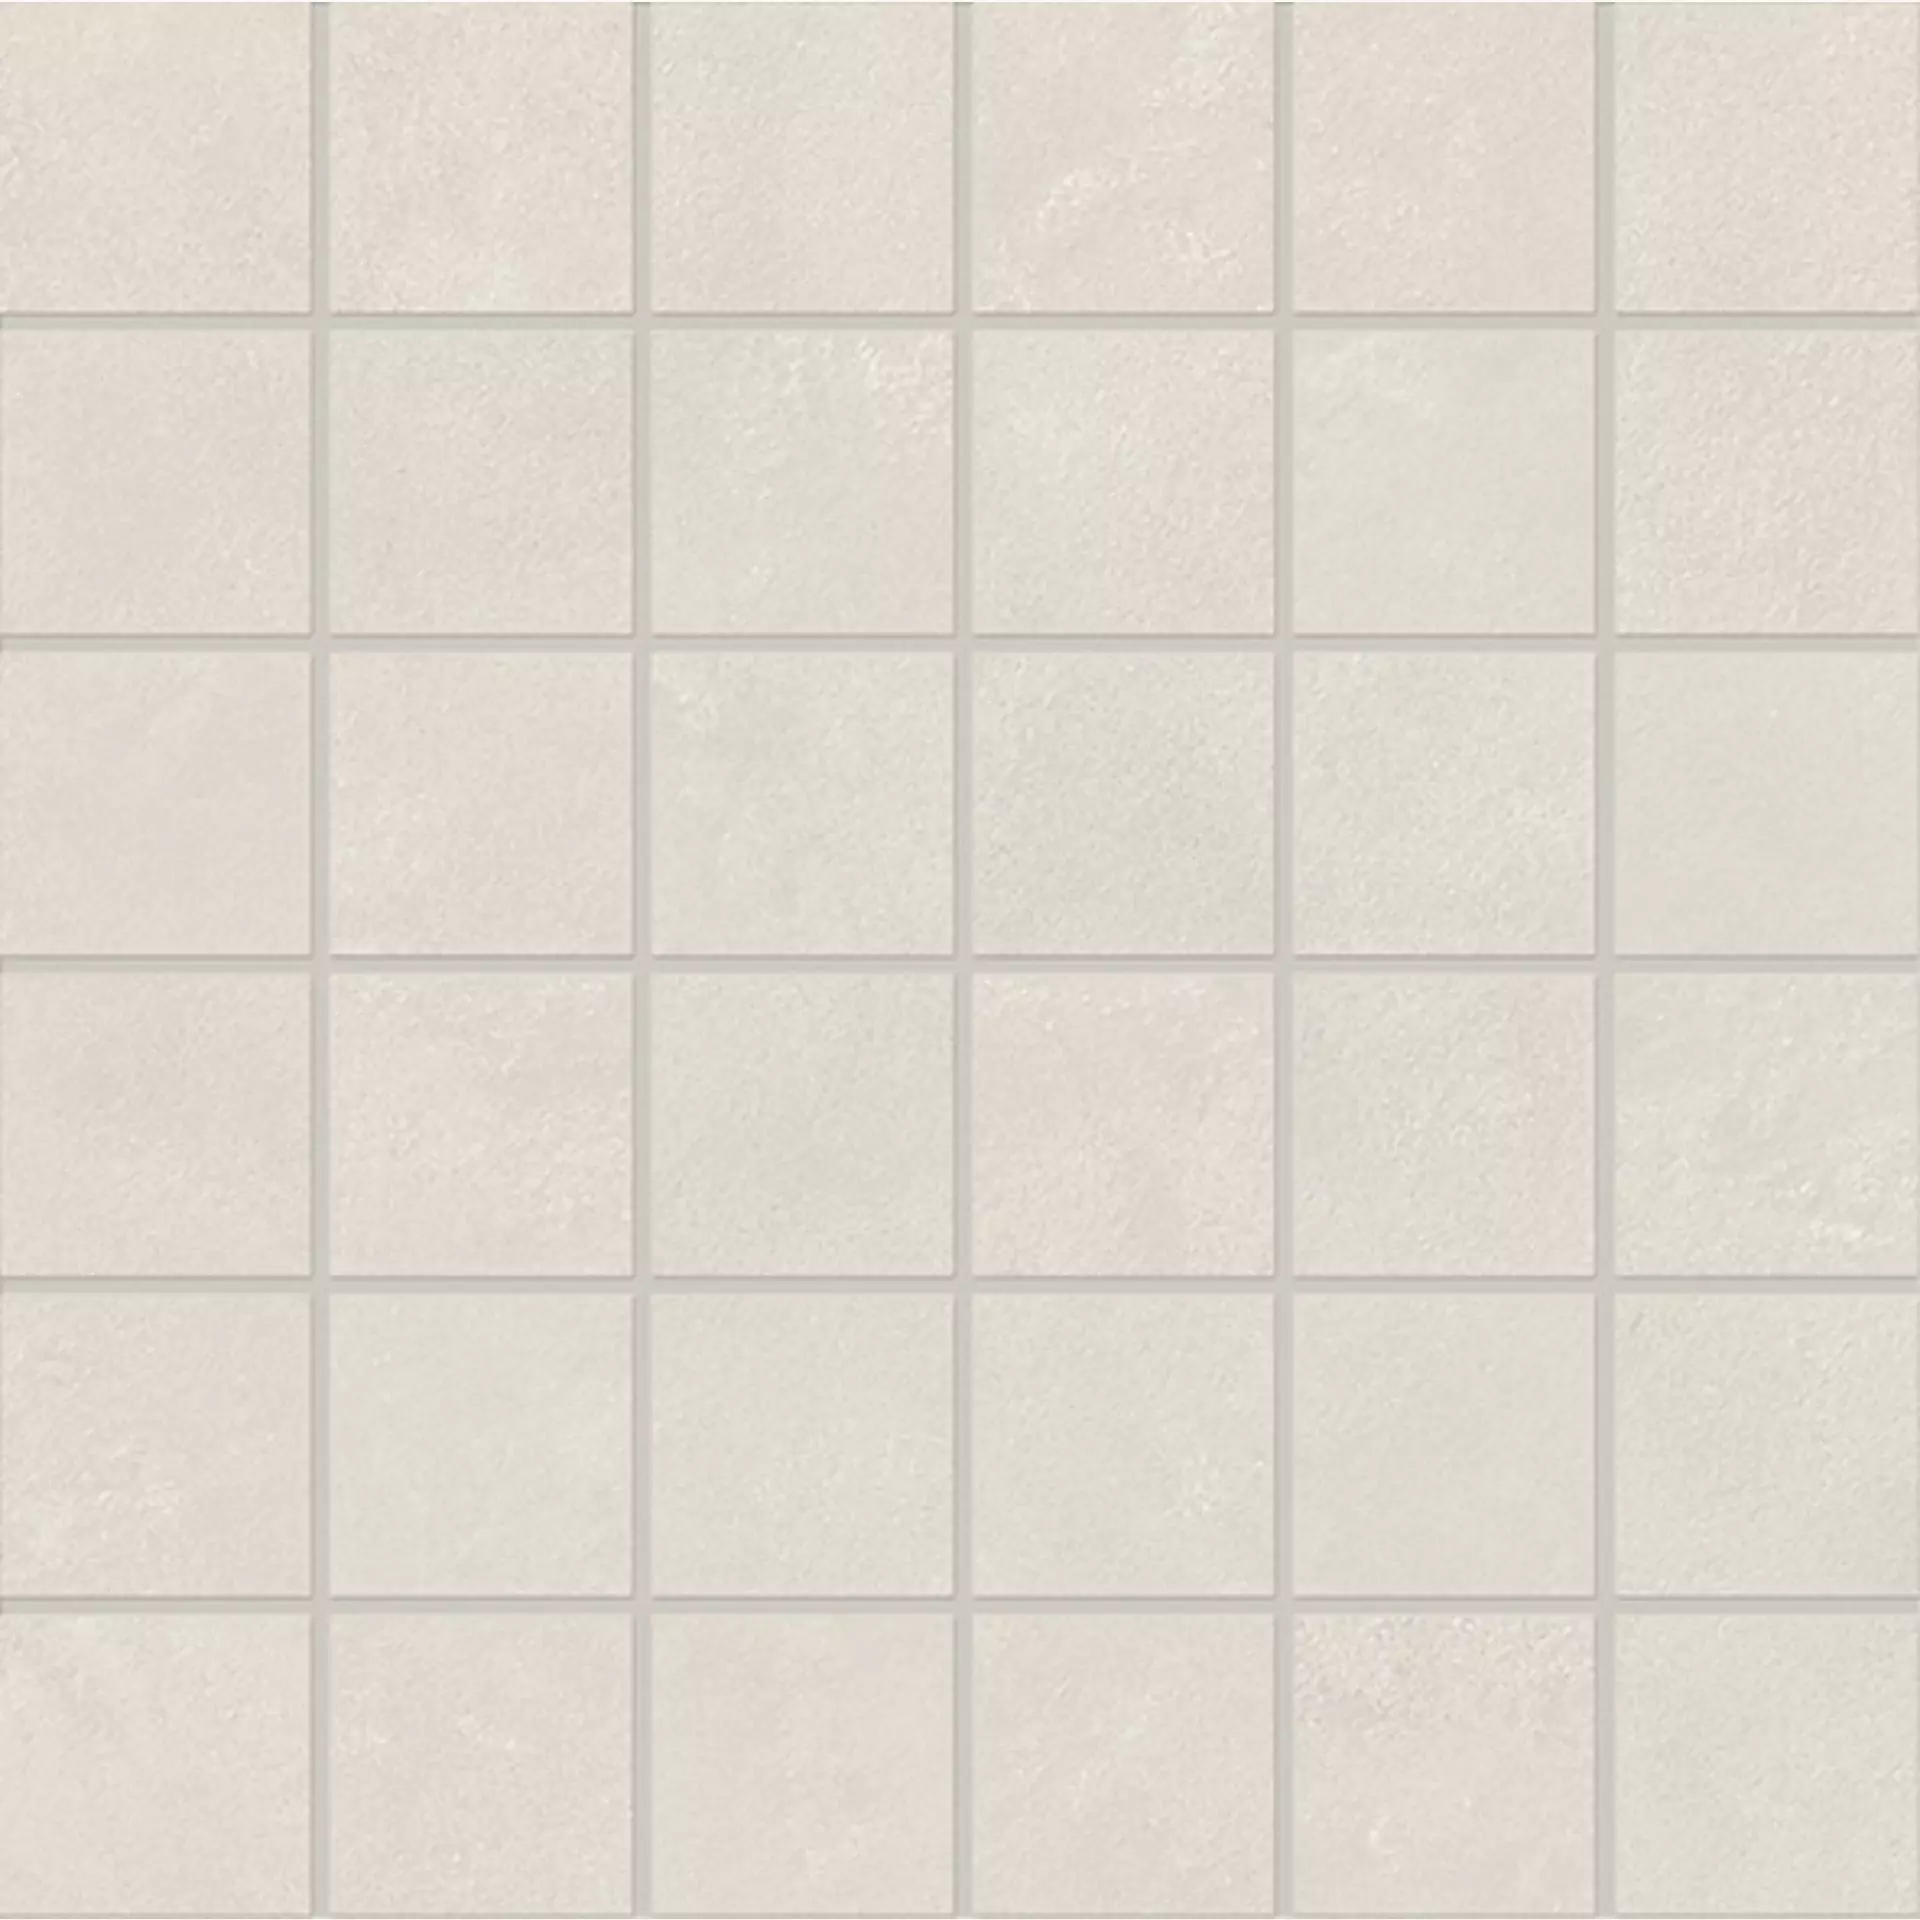 Supergres Colovers Love Sand Naturale – Matt Mosaic LSNS 30x30cm rectified 9mm